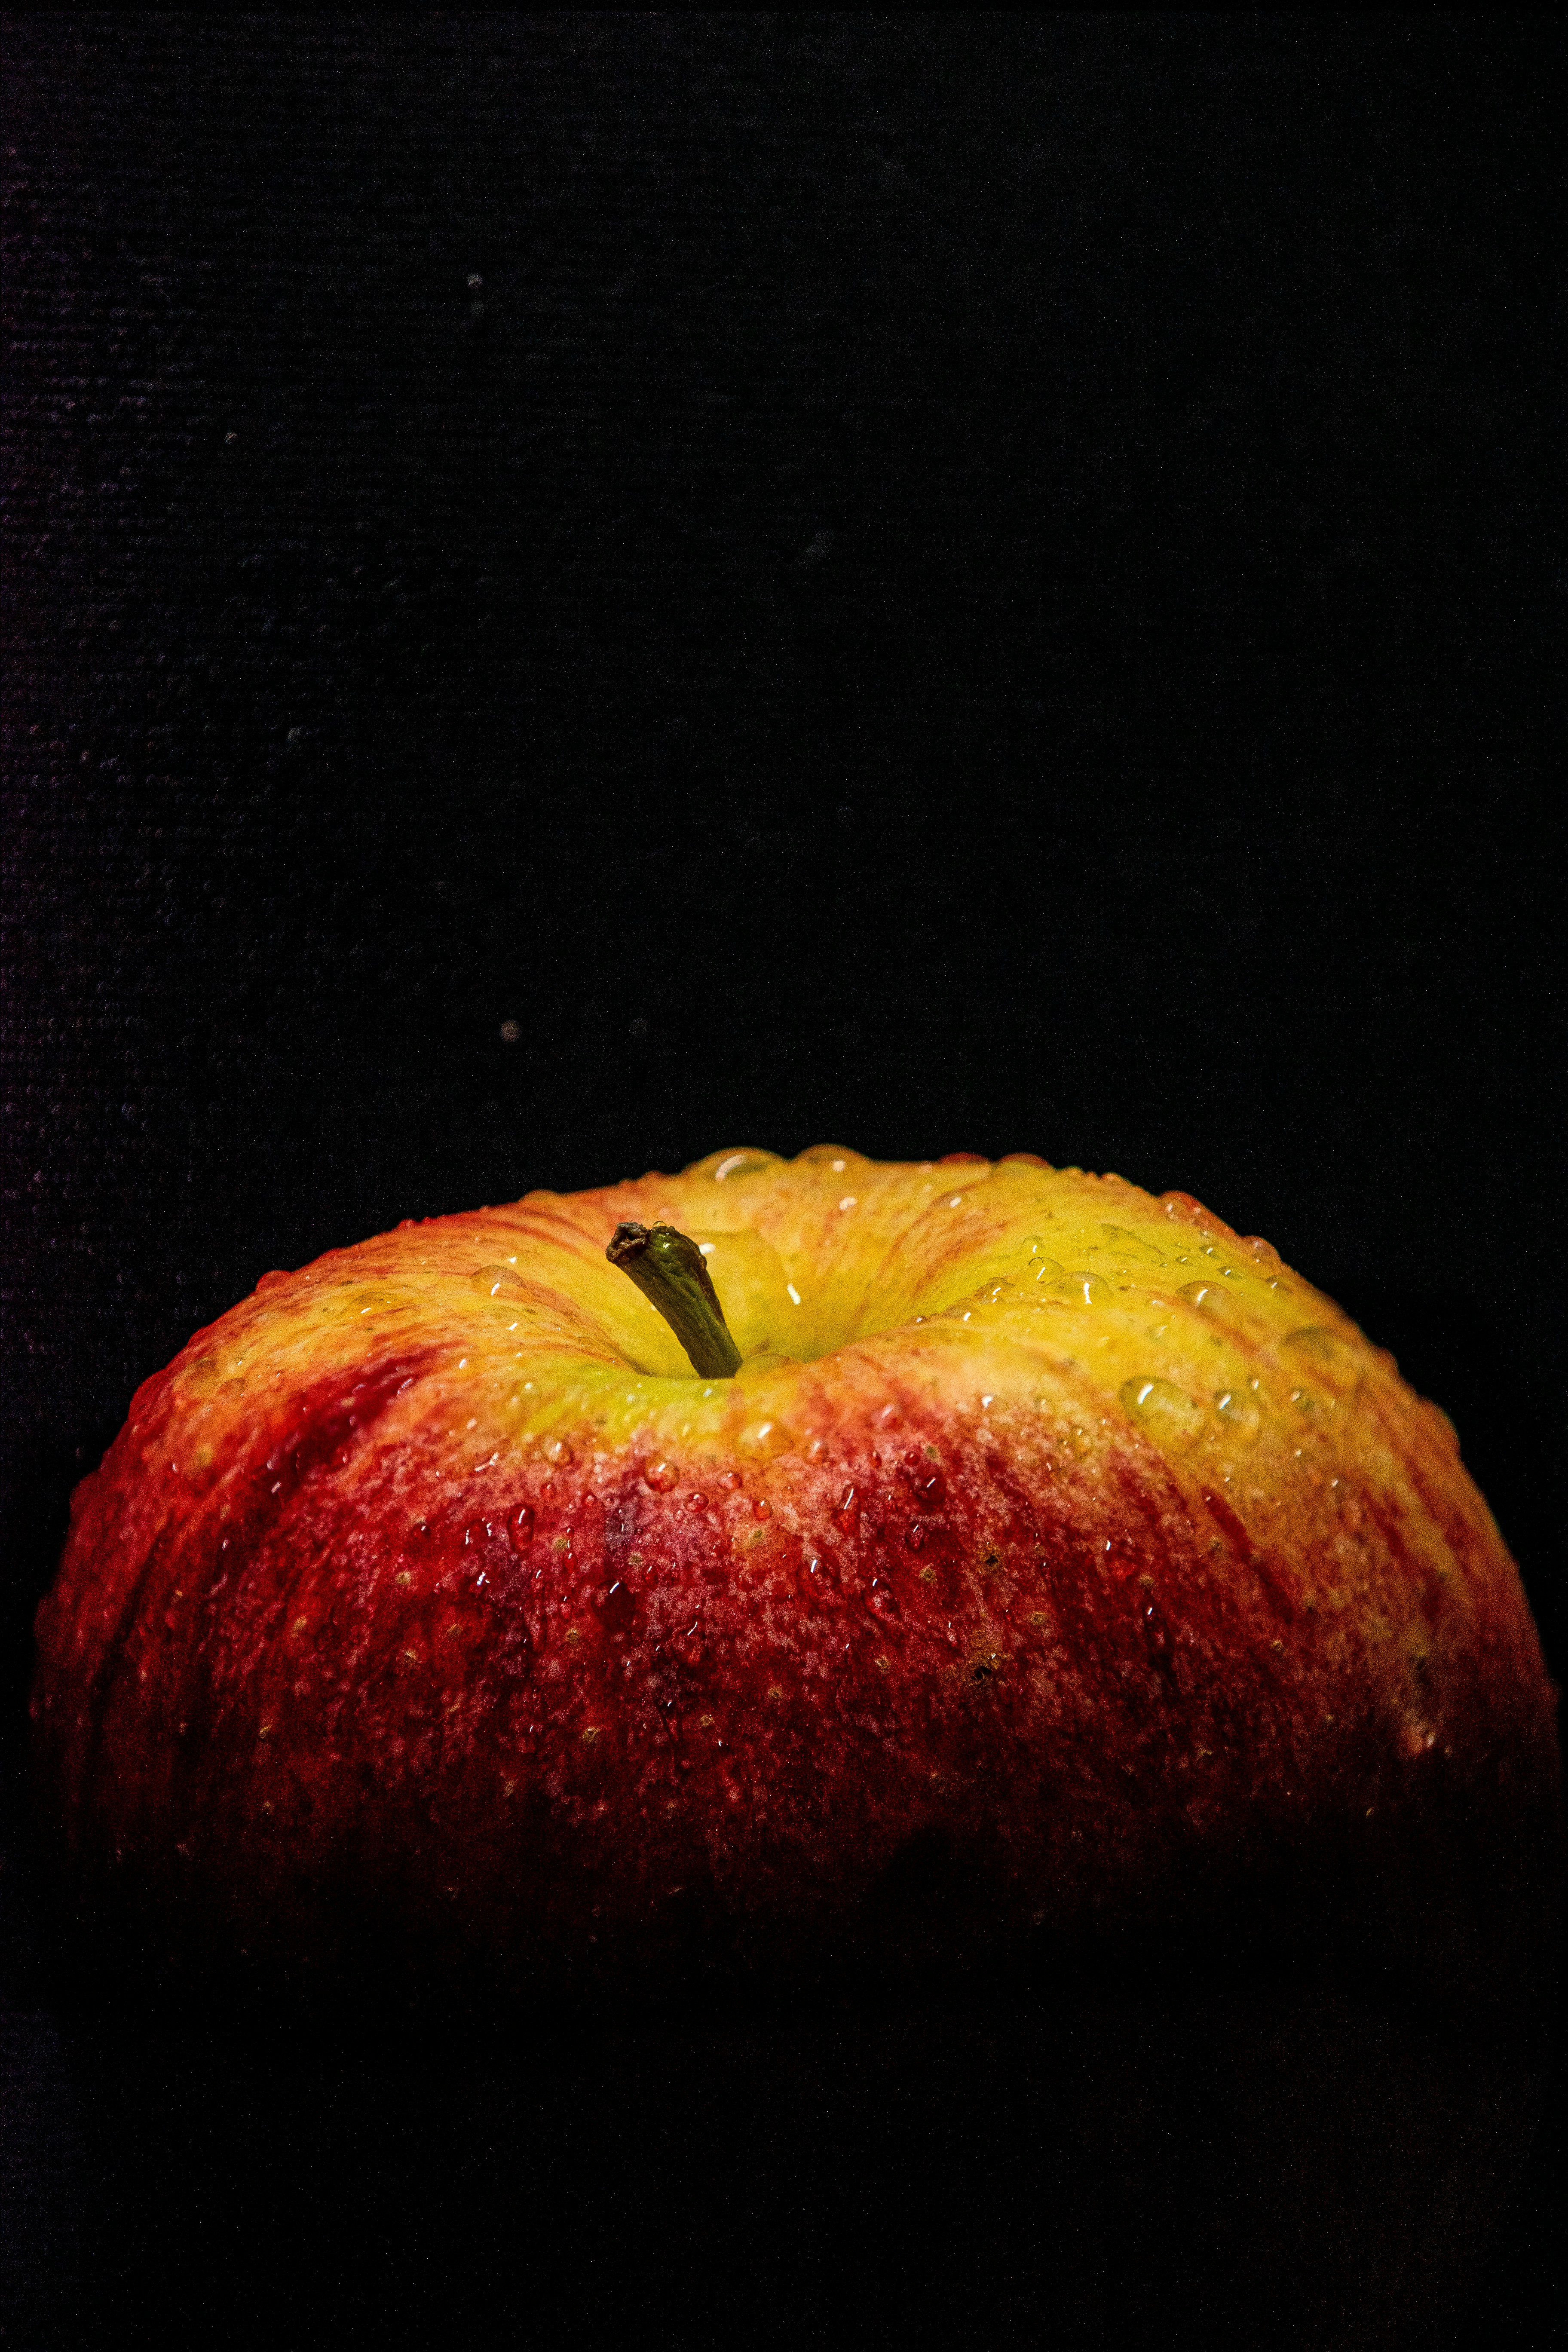 A bright red yellow apple, wet with dew, on a dark black background.